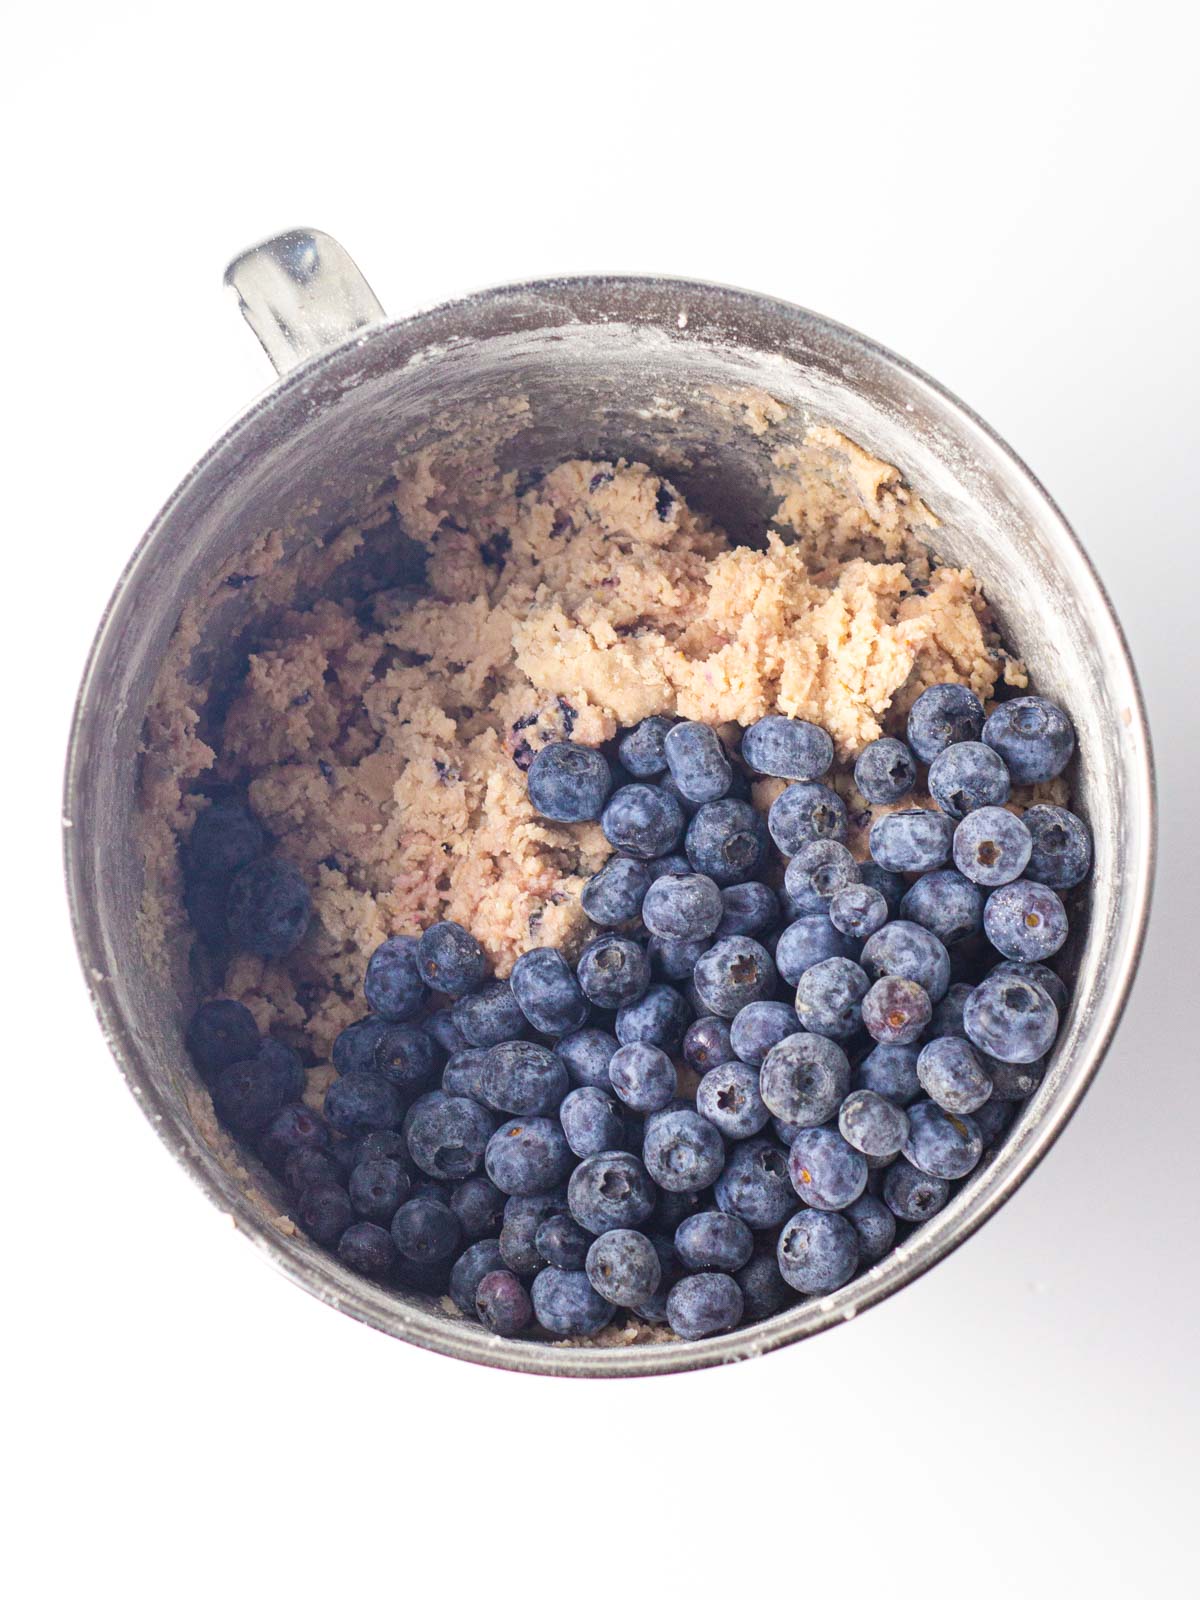 Fresh blueberries on top of the blueberry cookie dough in the silver mixing bowl.